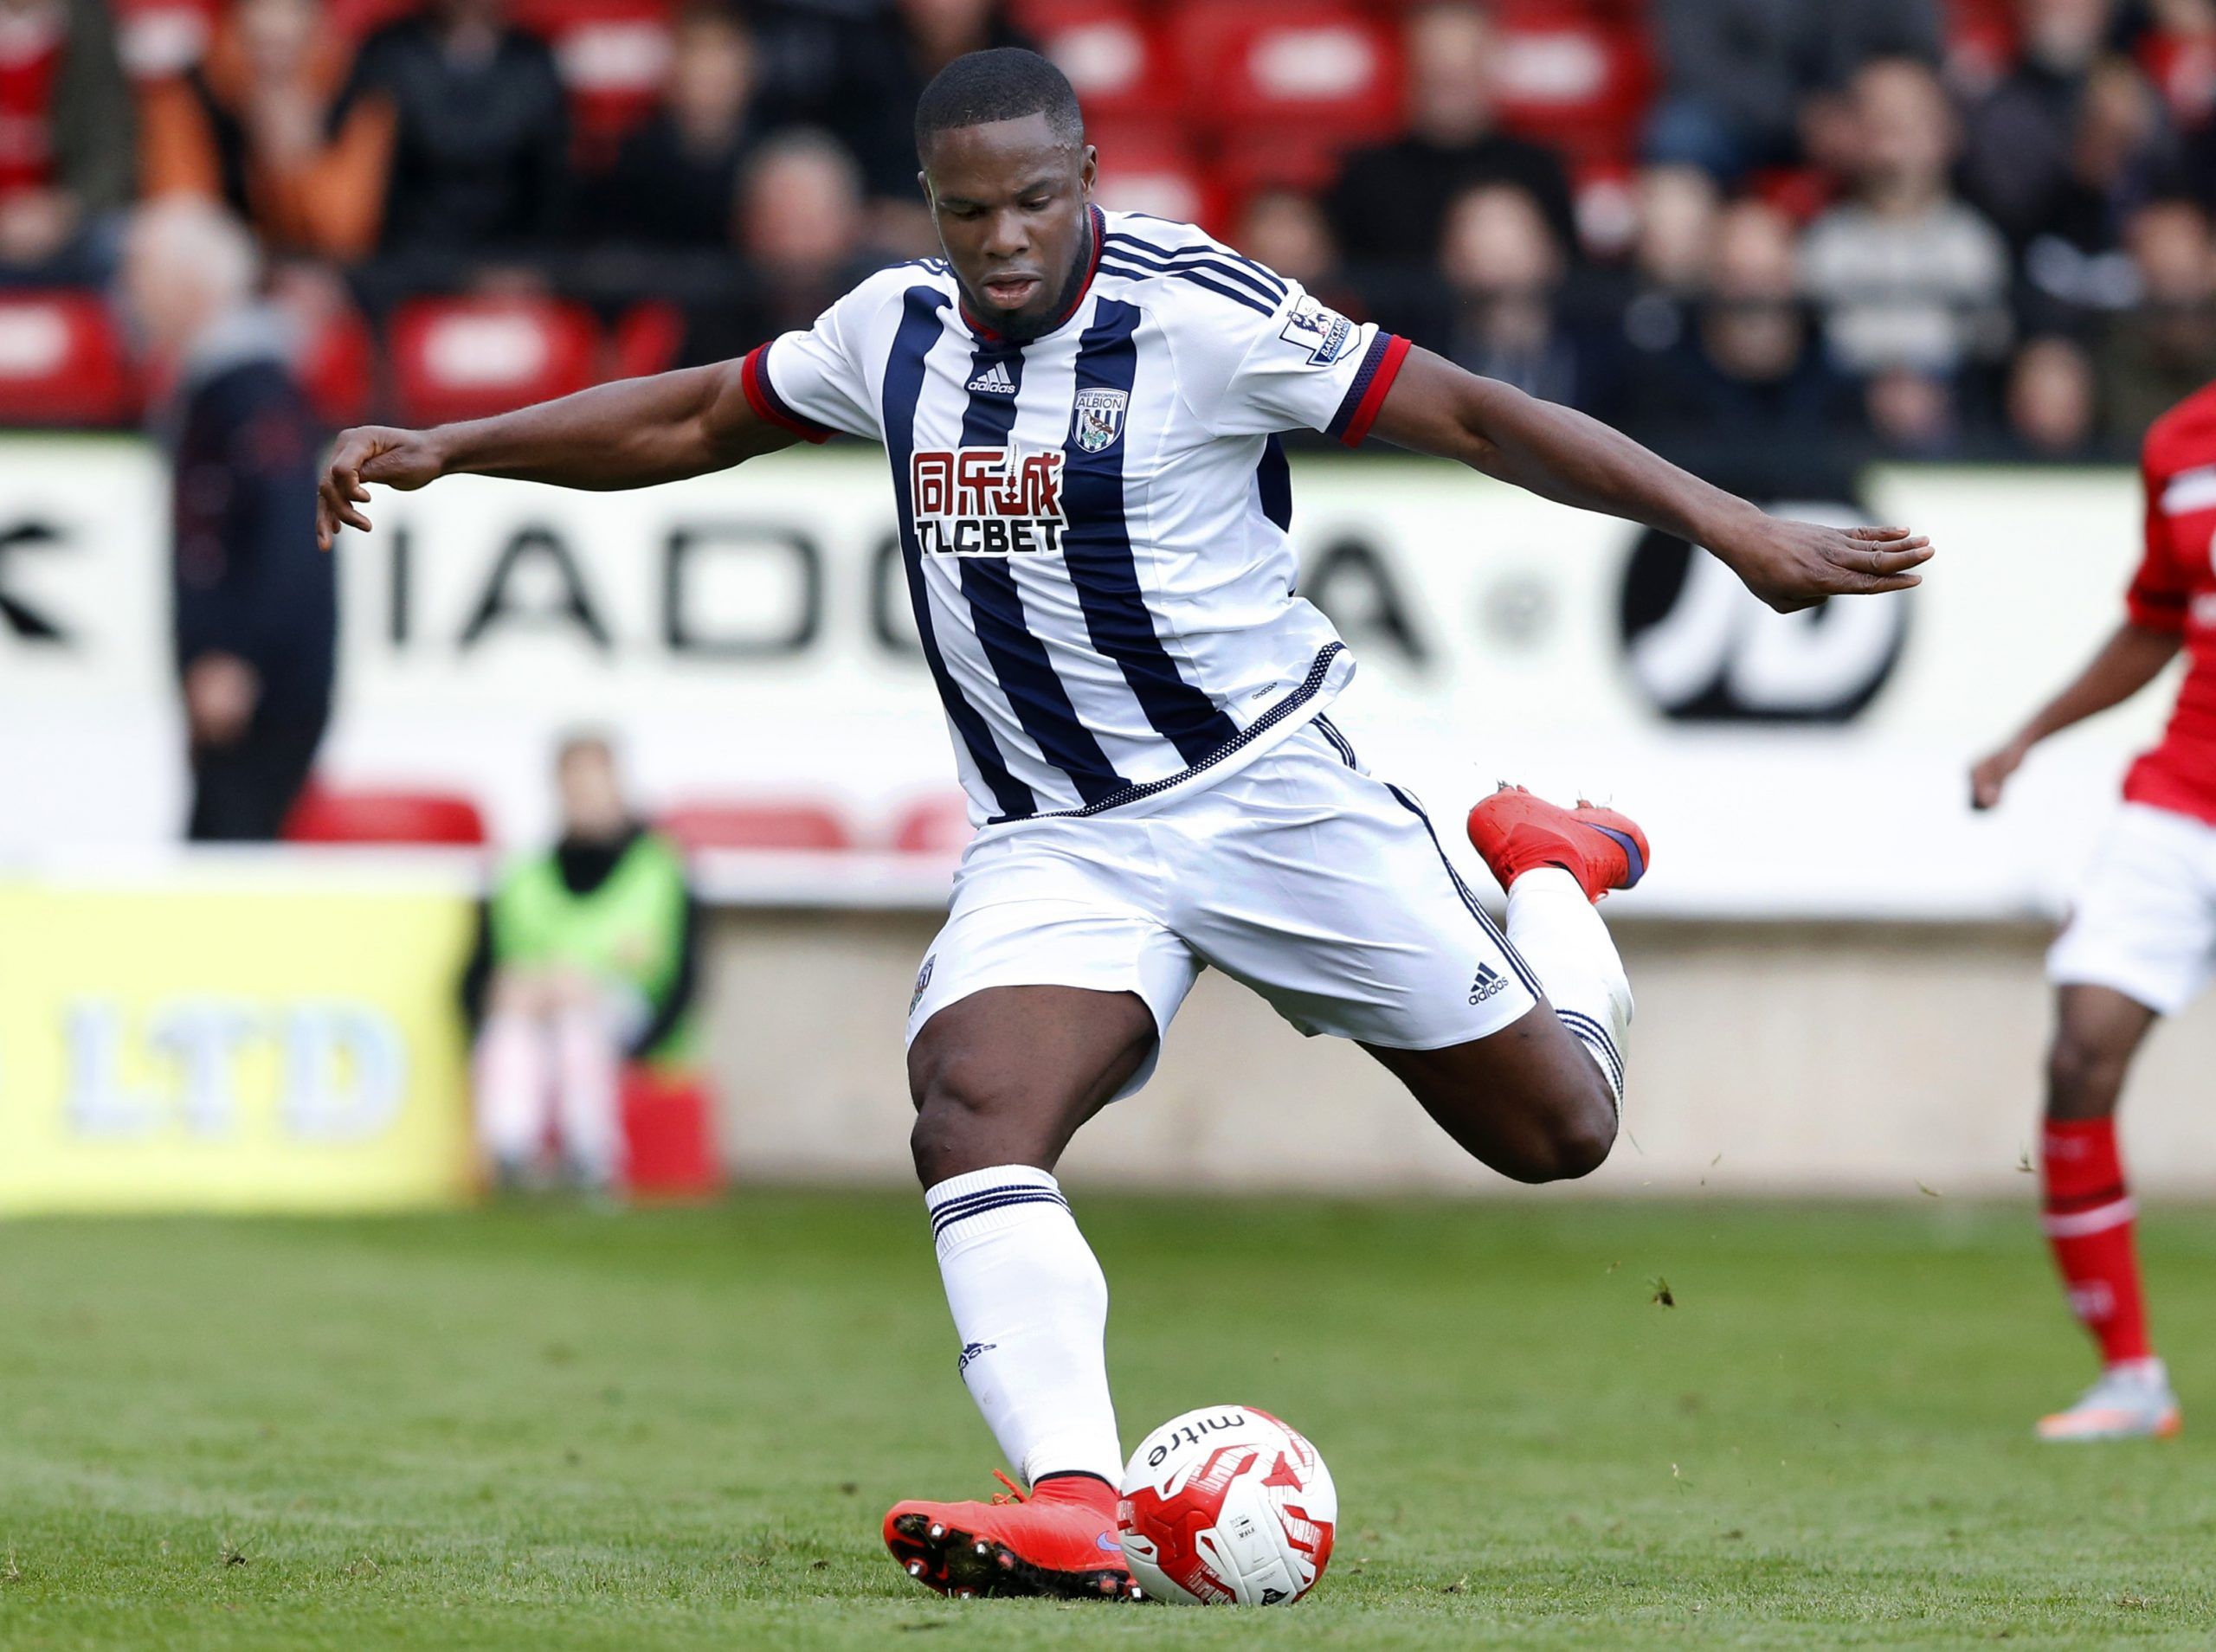 Lai Guochuan, WBA, WBA News, West Brom, West Brom news, West Brom update, West Bromwich Albion, Hawthorns, Baggies, Championship, Championship news, Steve Bruce, Historical transfer in numbers, Victor anichebe, Jeremy Peace, 
